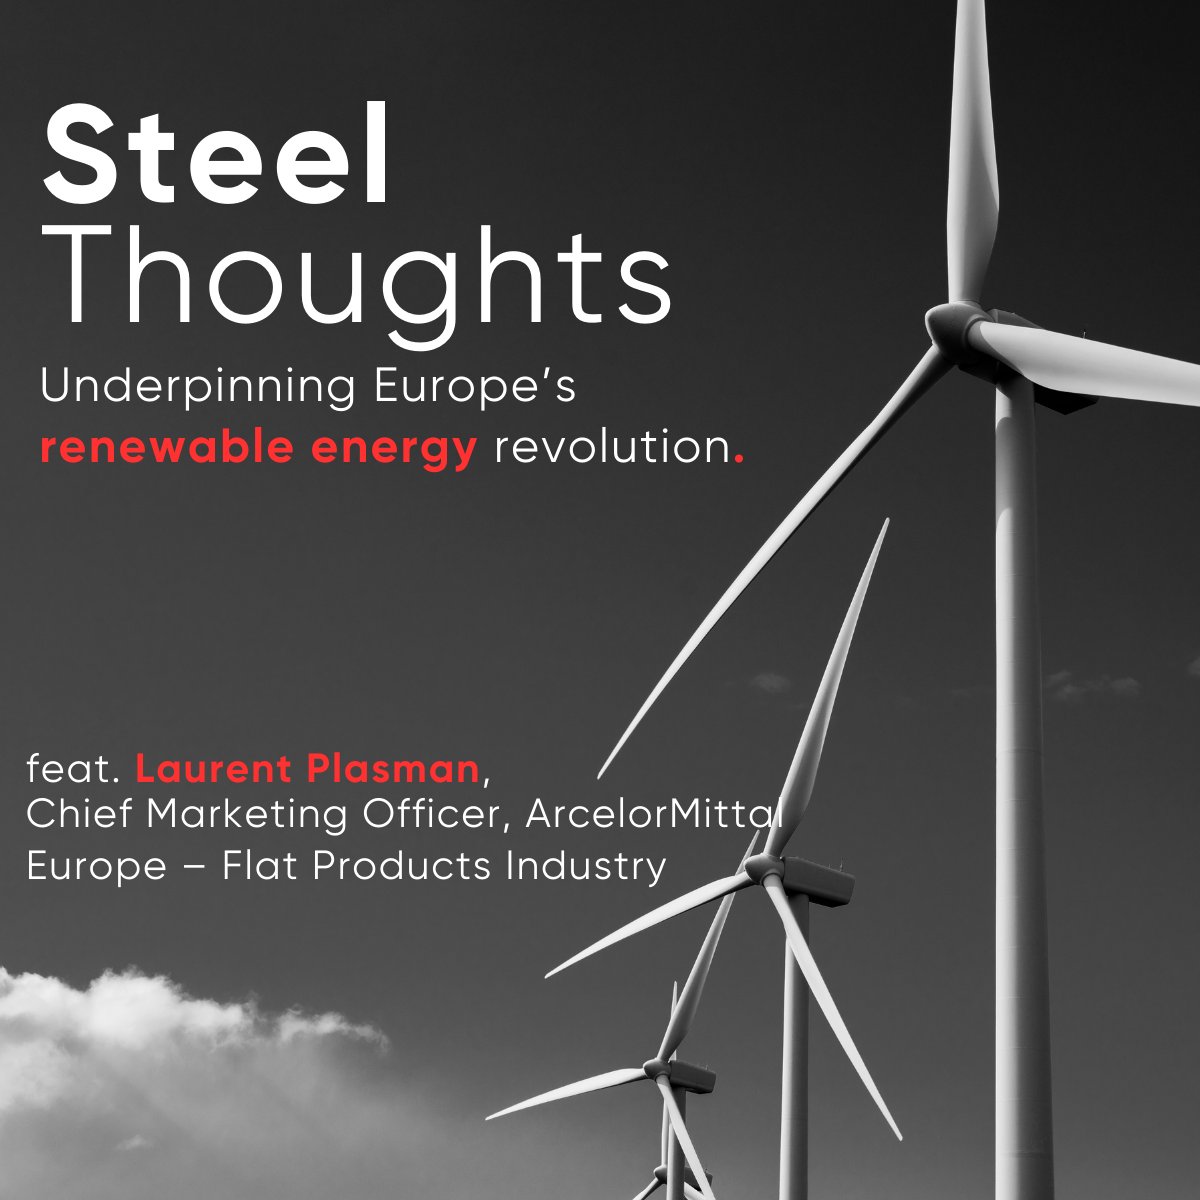 Laurent Plasman, Chief Marketing Officer, ArcelorMittal Europe – Flat Products Industry, discusses Europe's ambitious green energy plans, the impact this is having on the steel industry and how ArcelorMittal is responding. corporate.arcelormittal.com/smarter-future…… #SteelThoughts, #SmarterSteel,